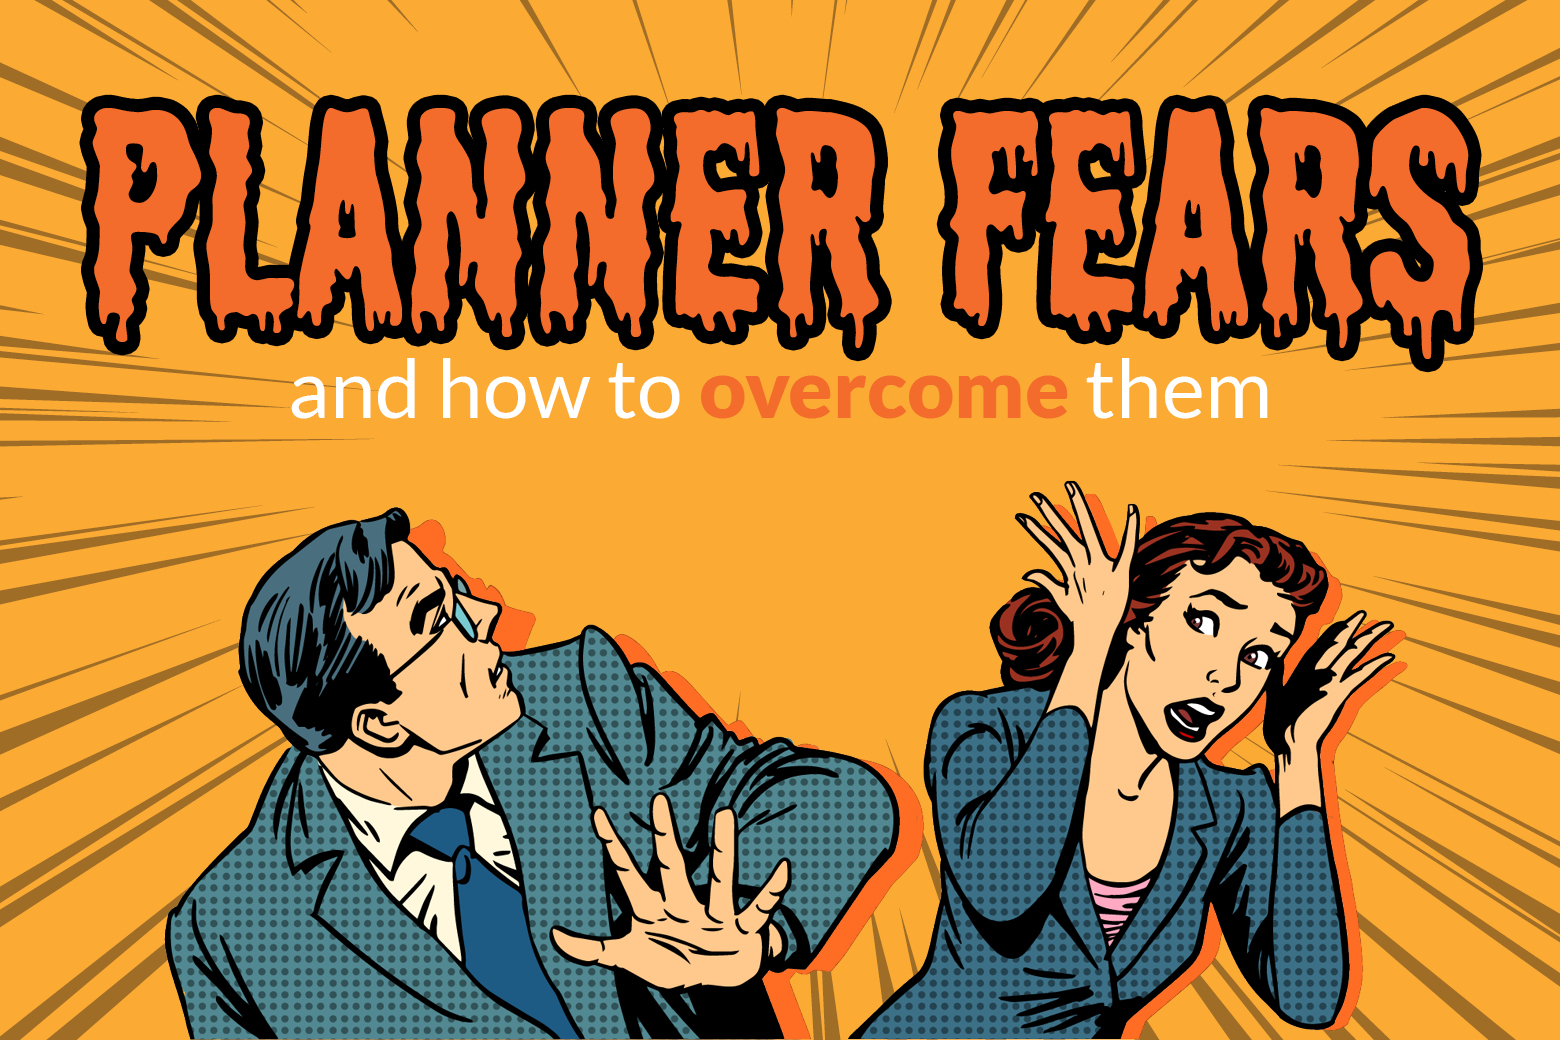 Planner fears and how to overcome them